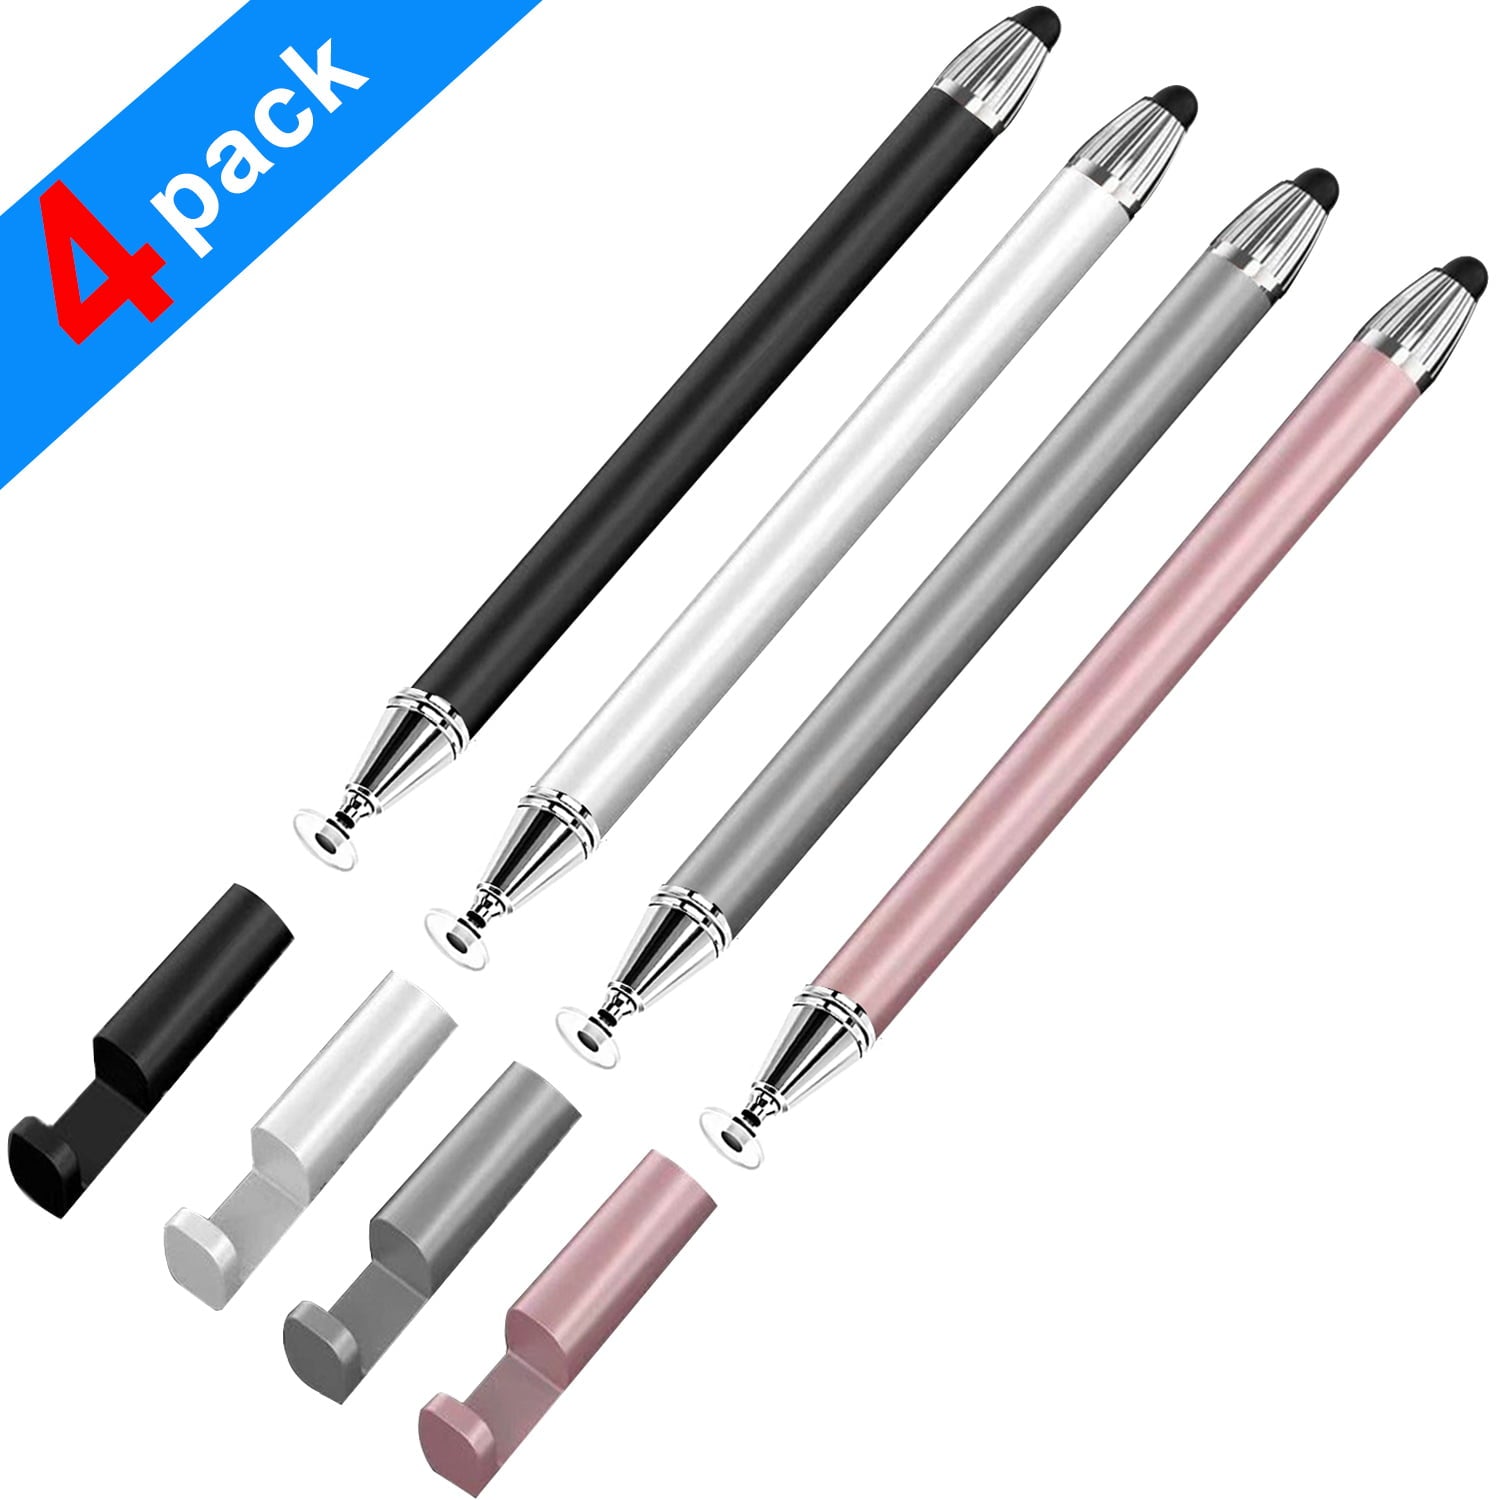 Stylus Pen For IPad, Touch Screens Capacitive Disc Tip Pencil IPad Pencil  Tablet Stylus Pencil All Devices